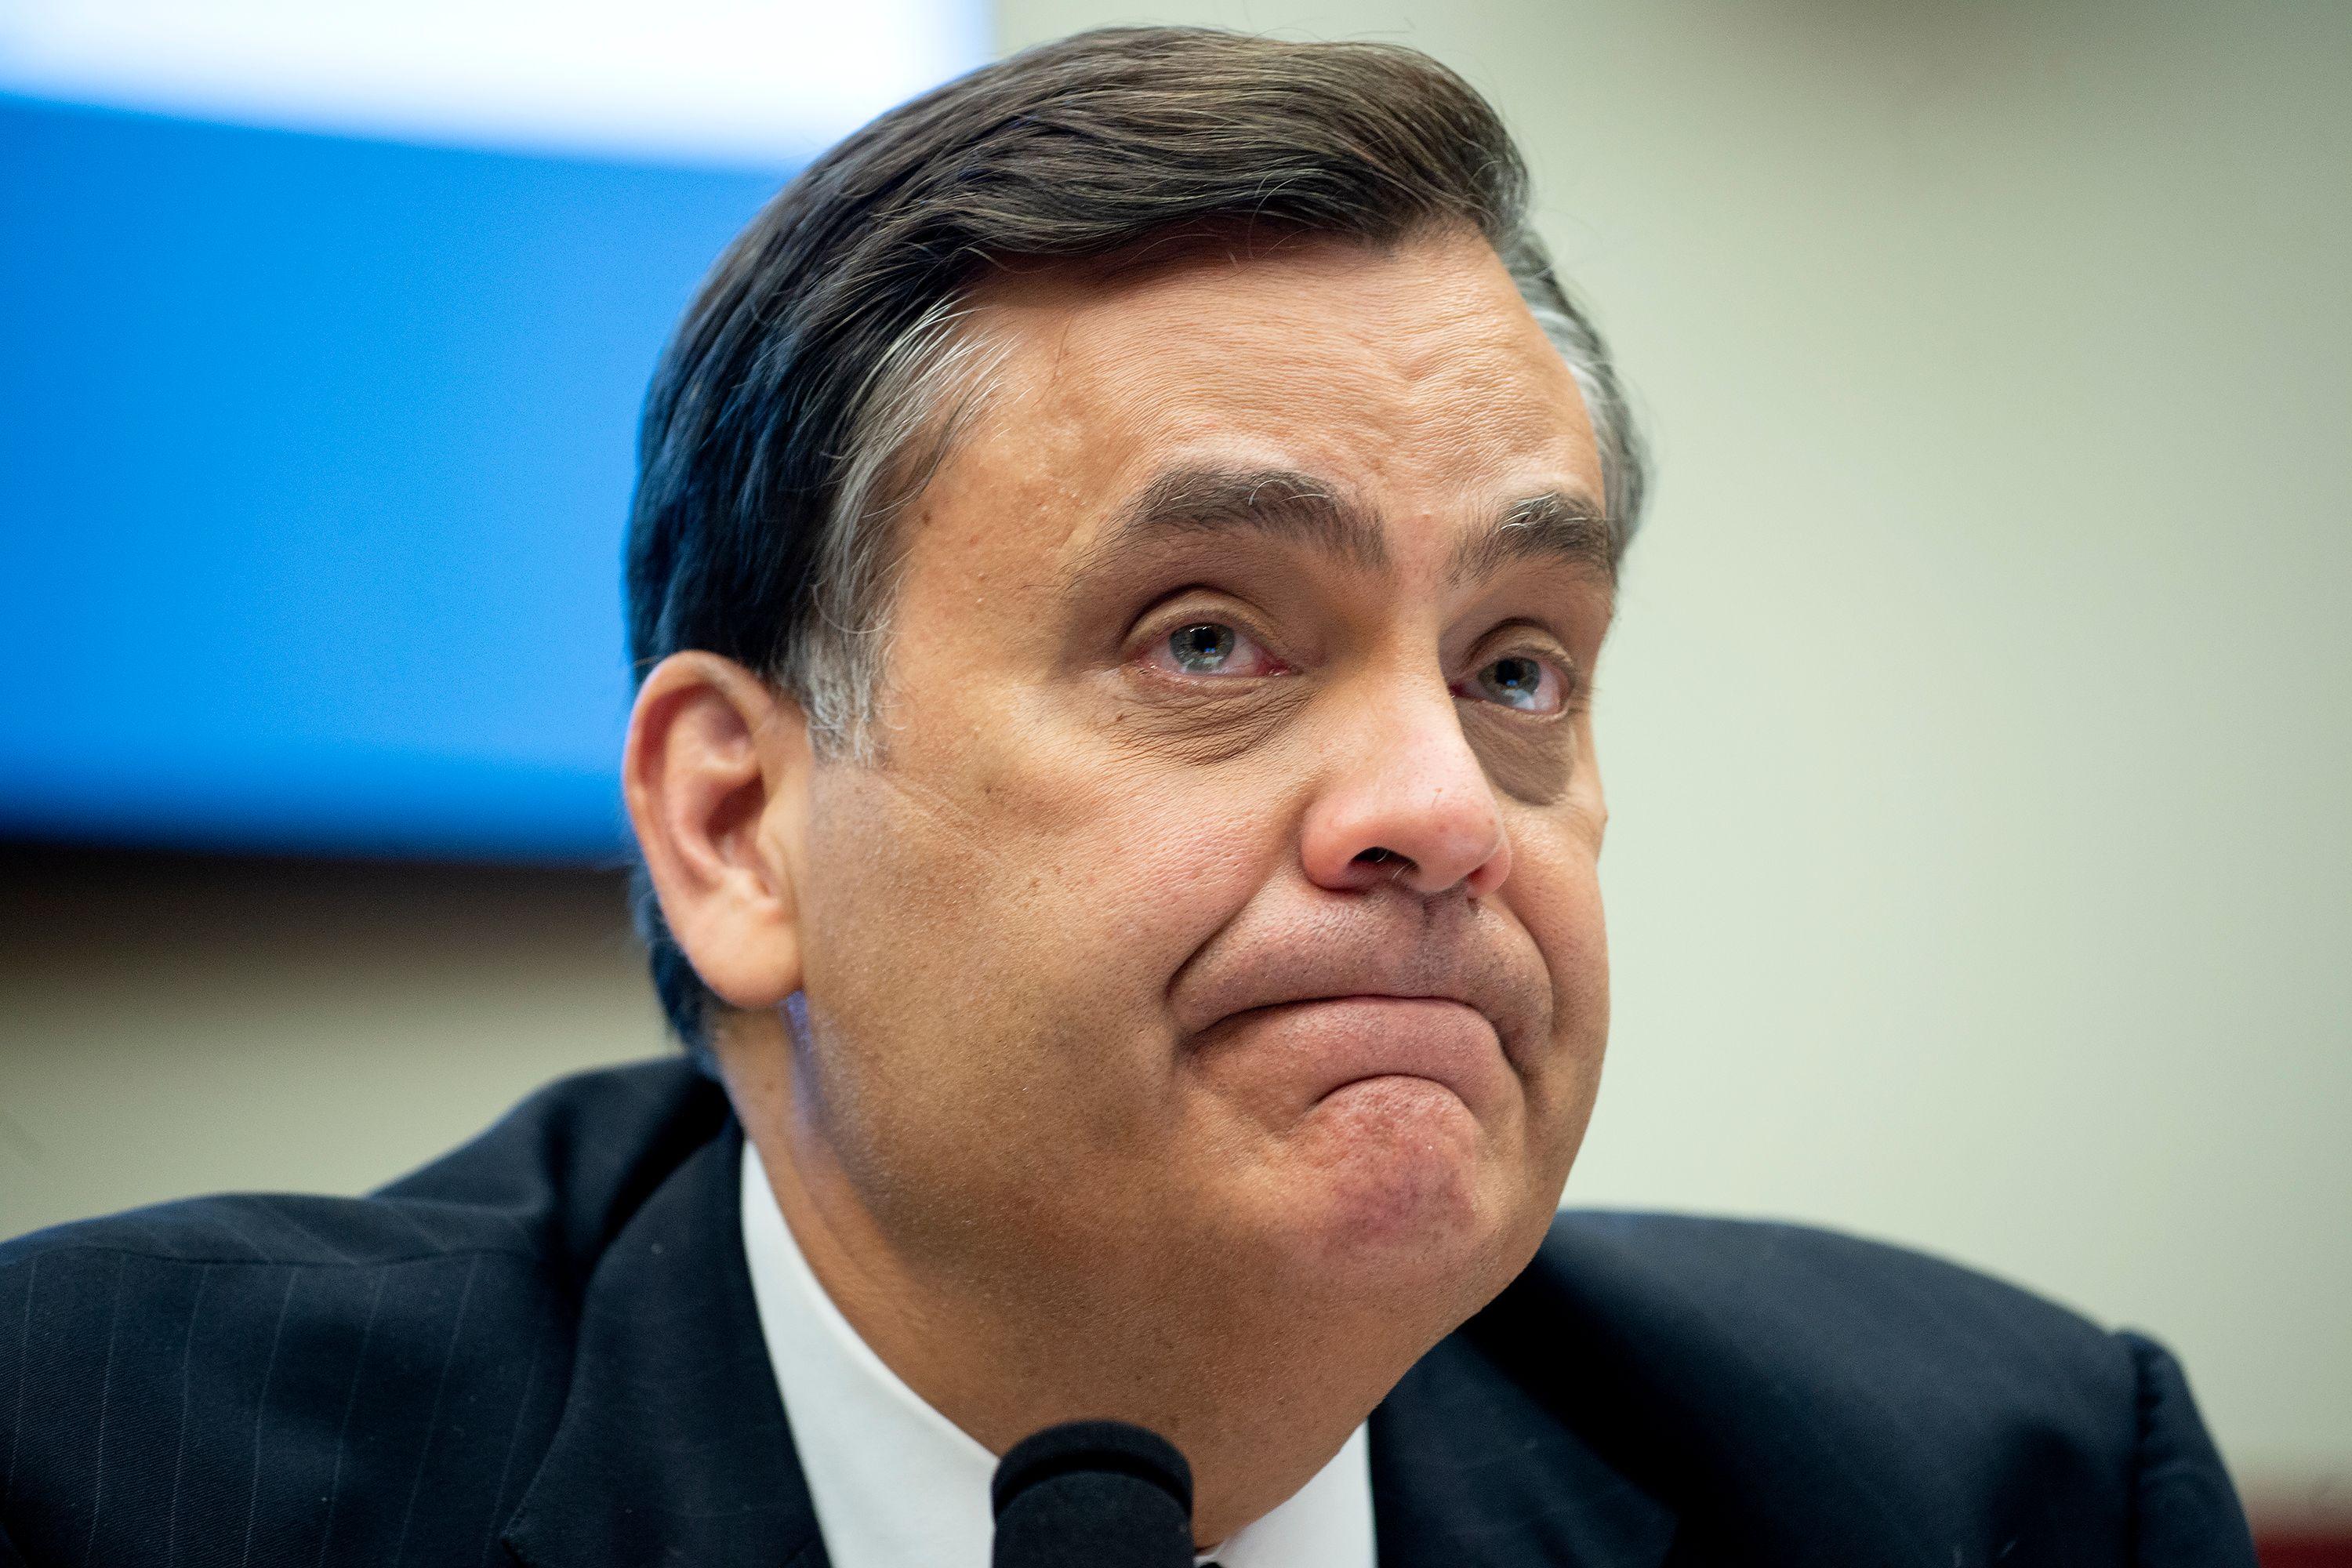 George Washington University Law School professor Jonathan Turley is seen during a House Natural Resources Committee hearing on "The US Park Police Attack on Peaceful Protesters at Lafayette Square", on Capitol Hill in Washington, DC, on June 29, 2020.